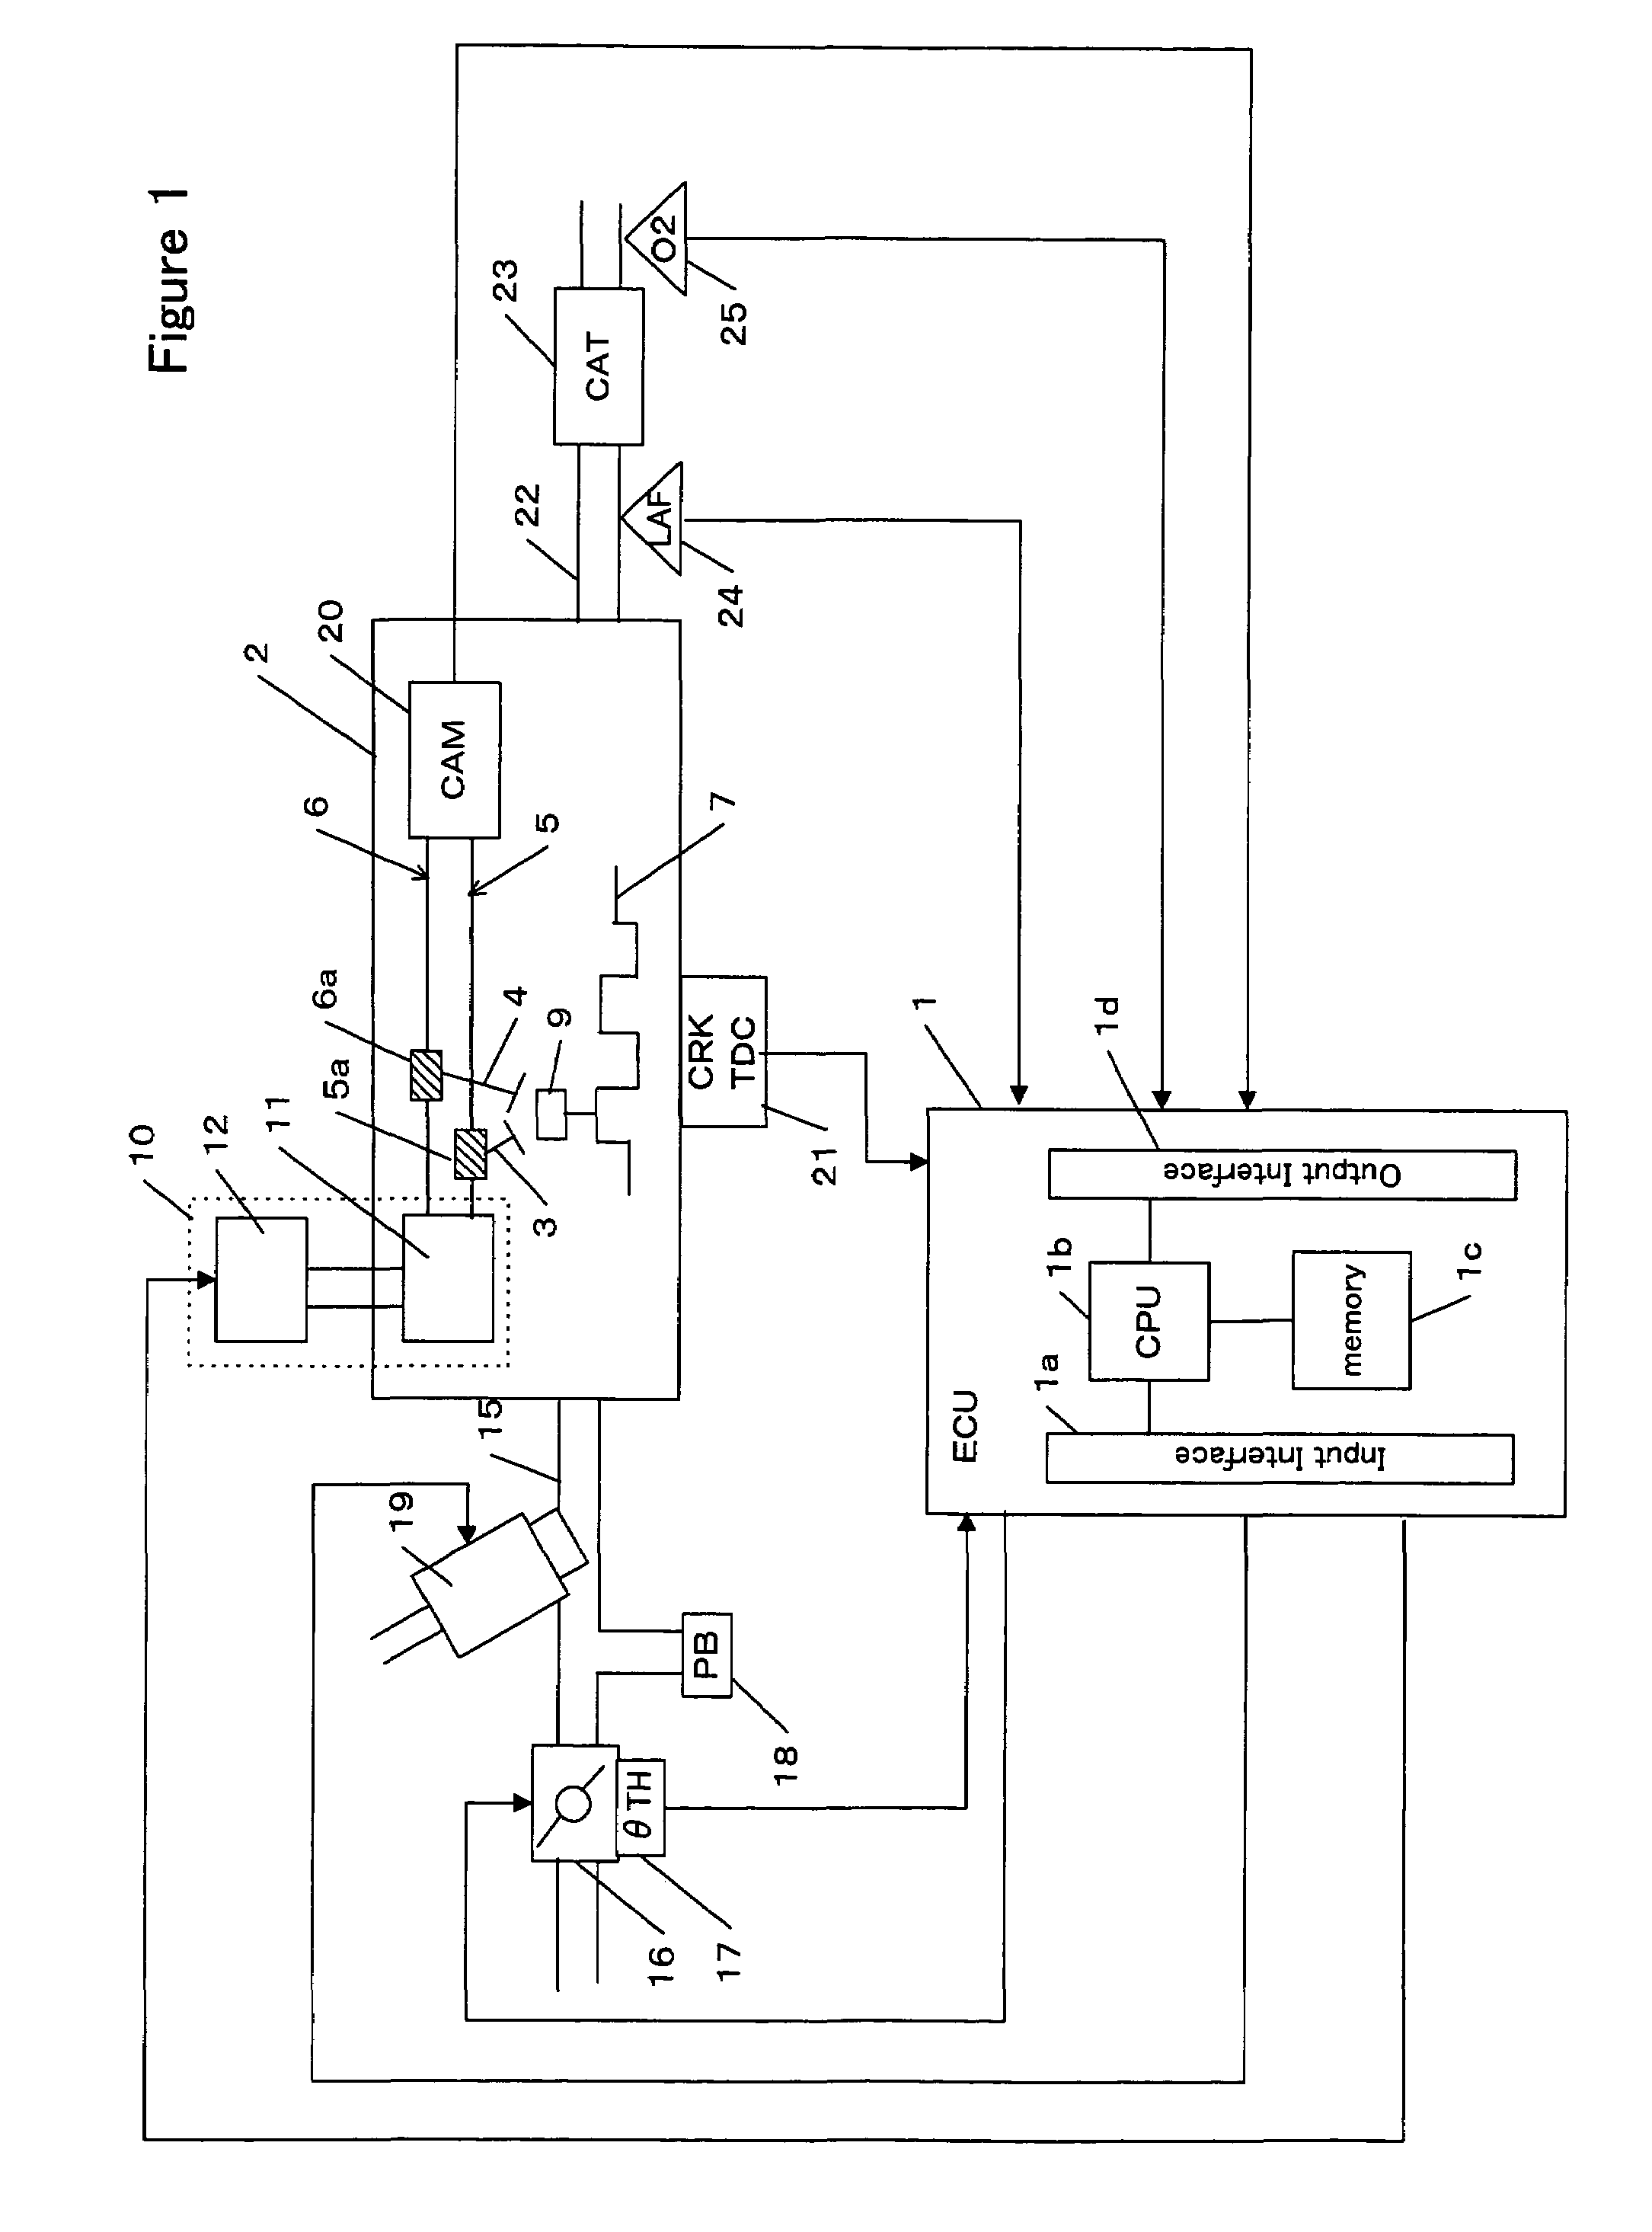 Control apparatus for controlling a plant by using a delta-sigma modulation algorithm